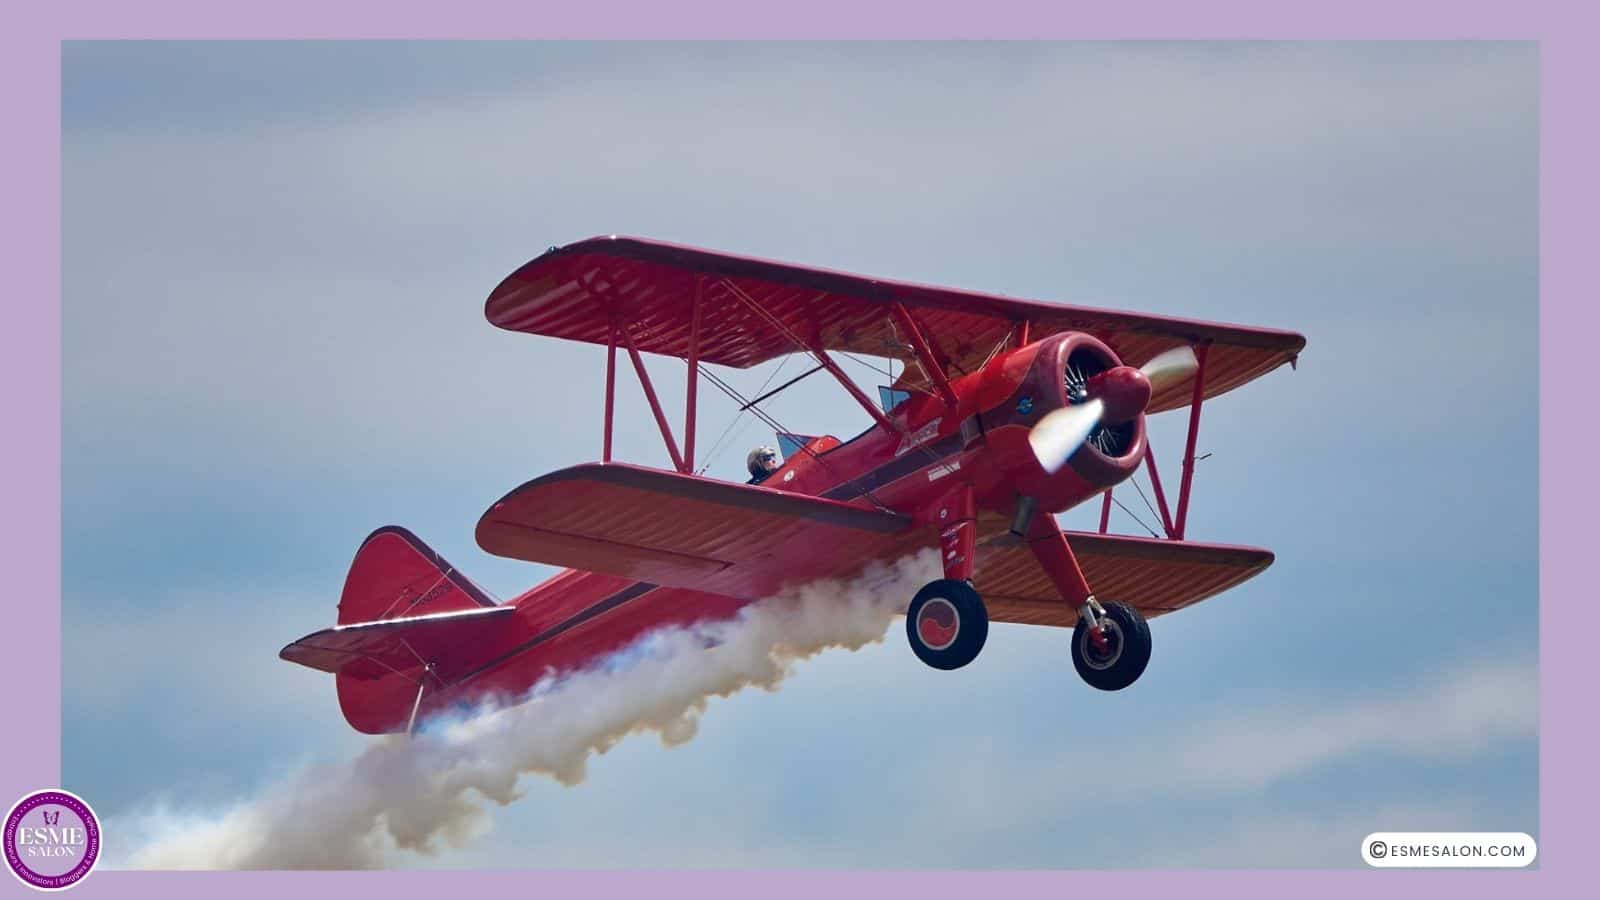 an image of a red biplane in flight